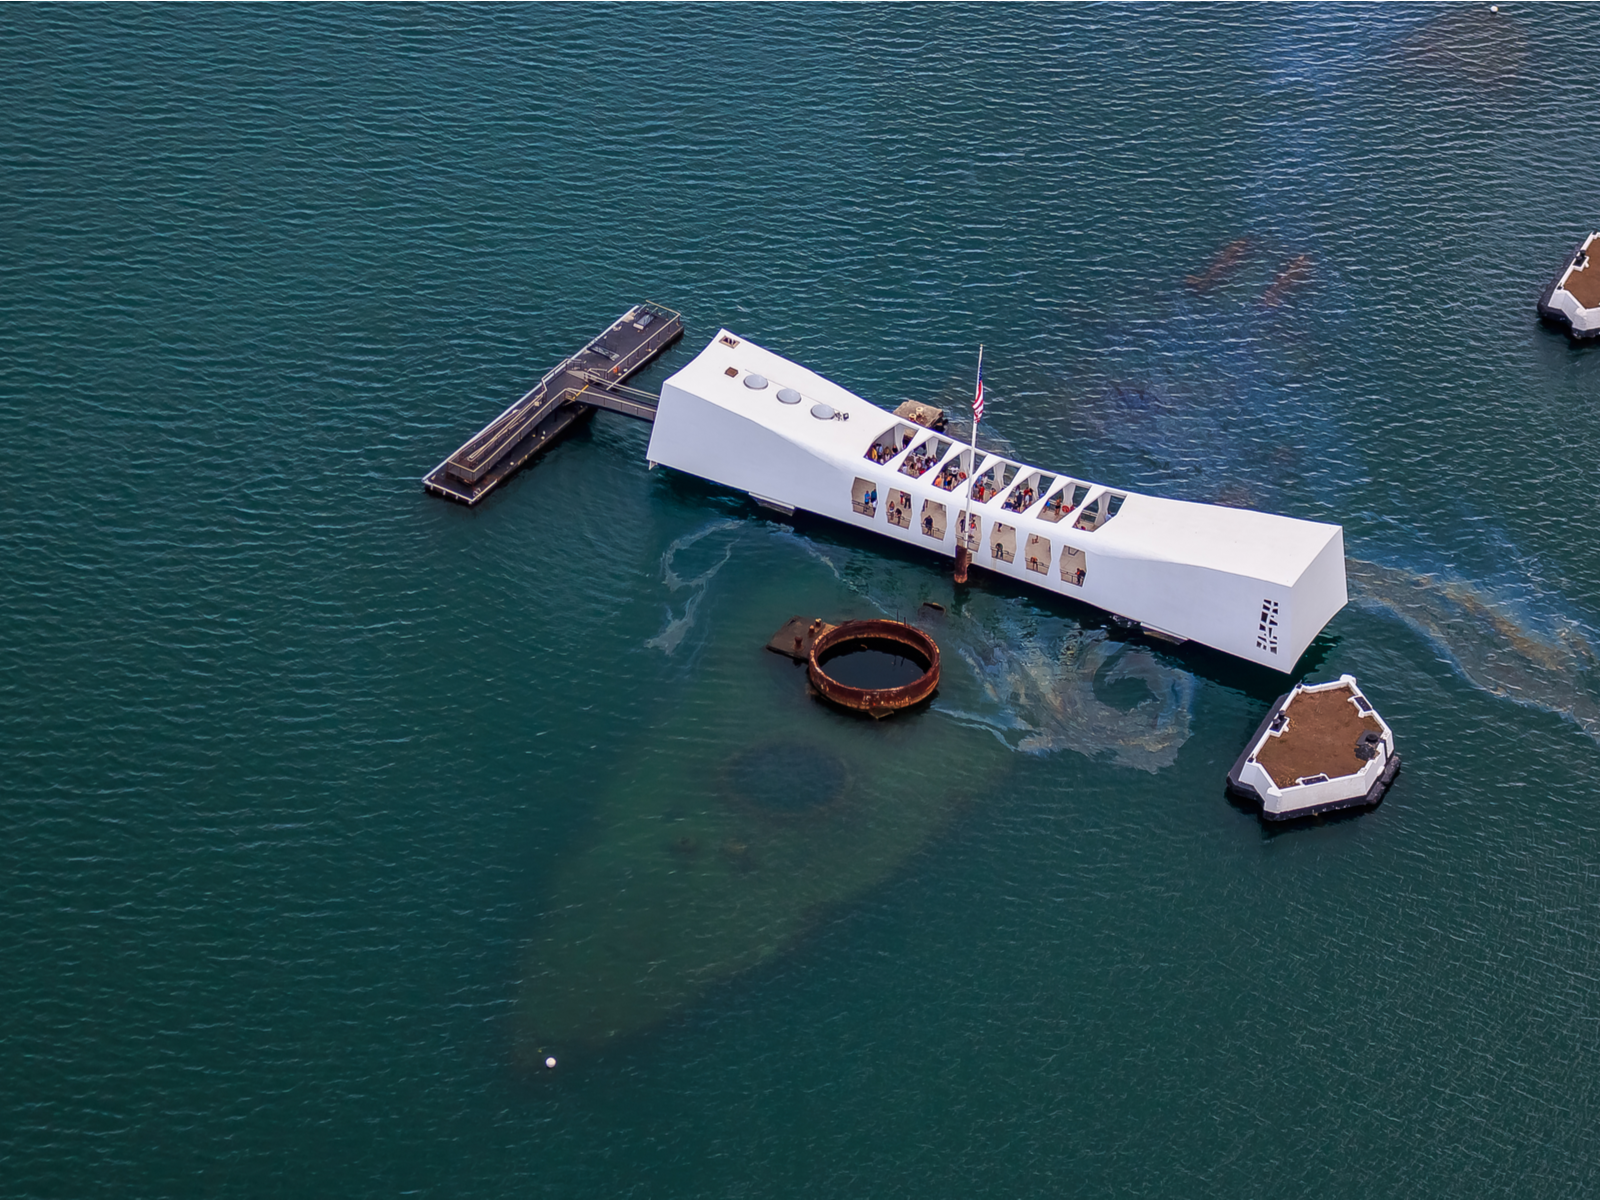 Aerial view of sunken USS Arizona Memorial, one of the most iconic places in America, in the Pacific National Monument in Pearl Harbor Honolulu Hawaii where a small amount of oil can be seen on water surface